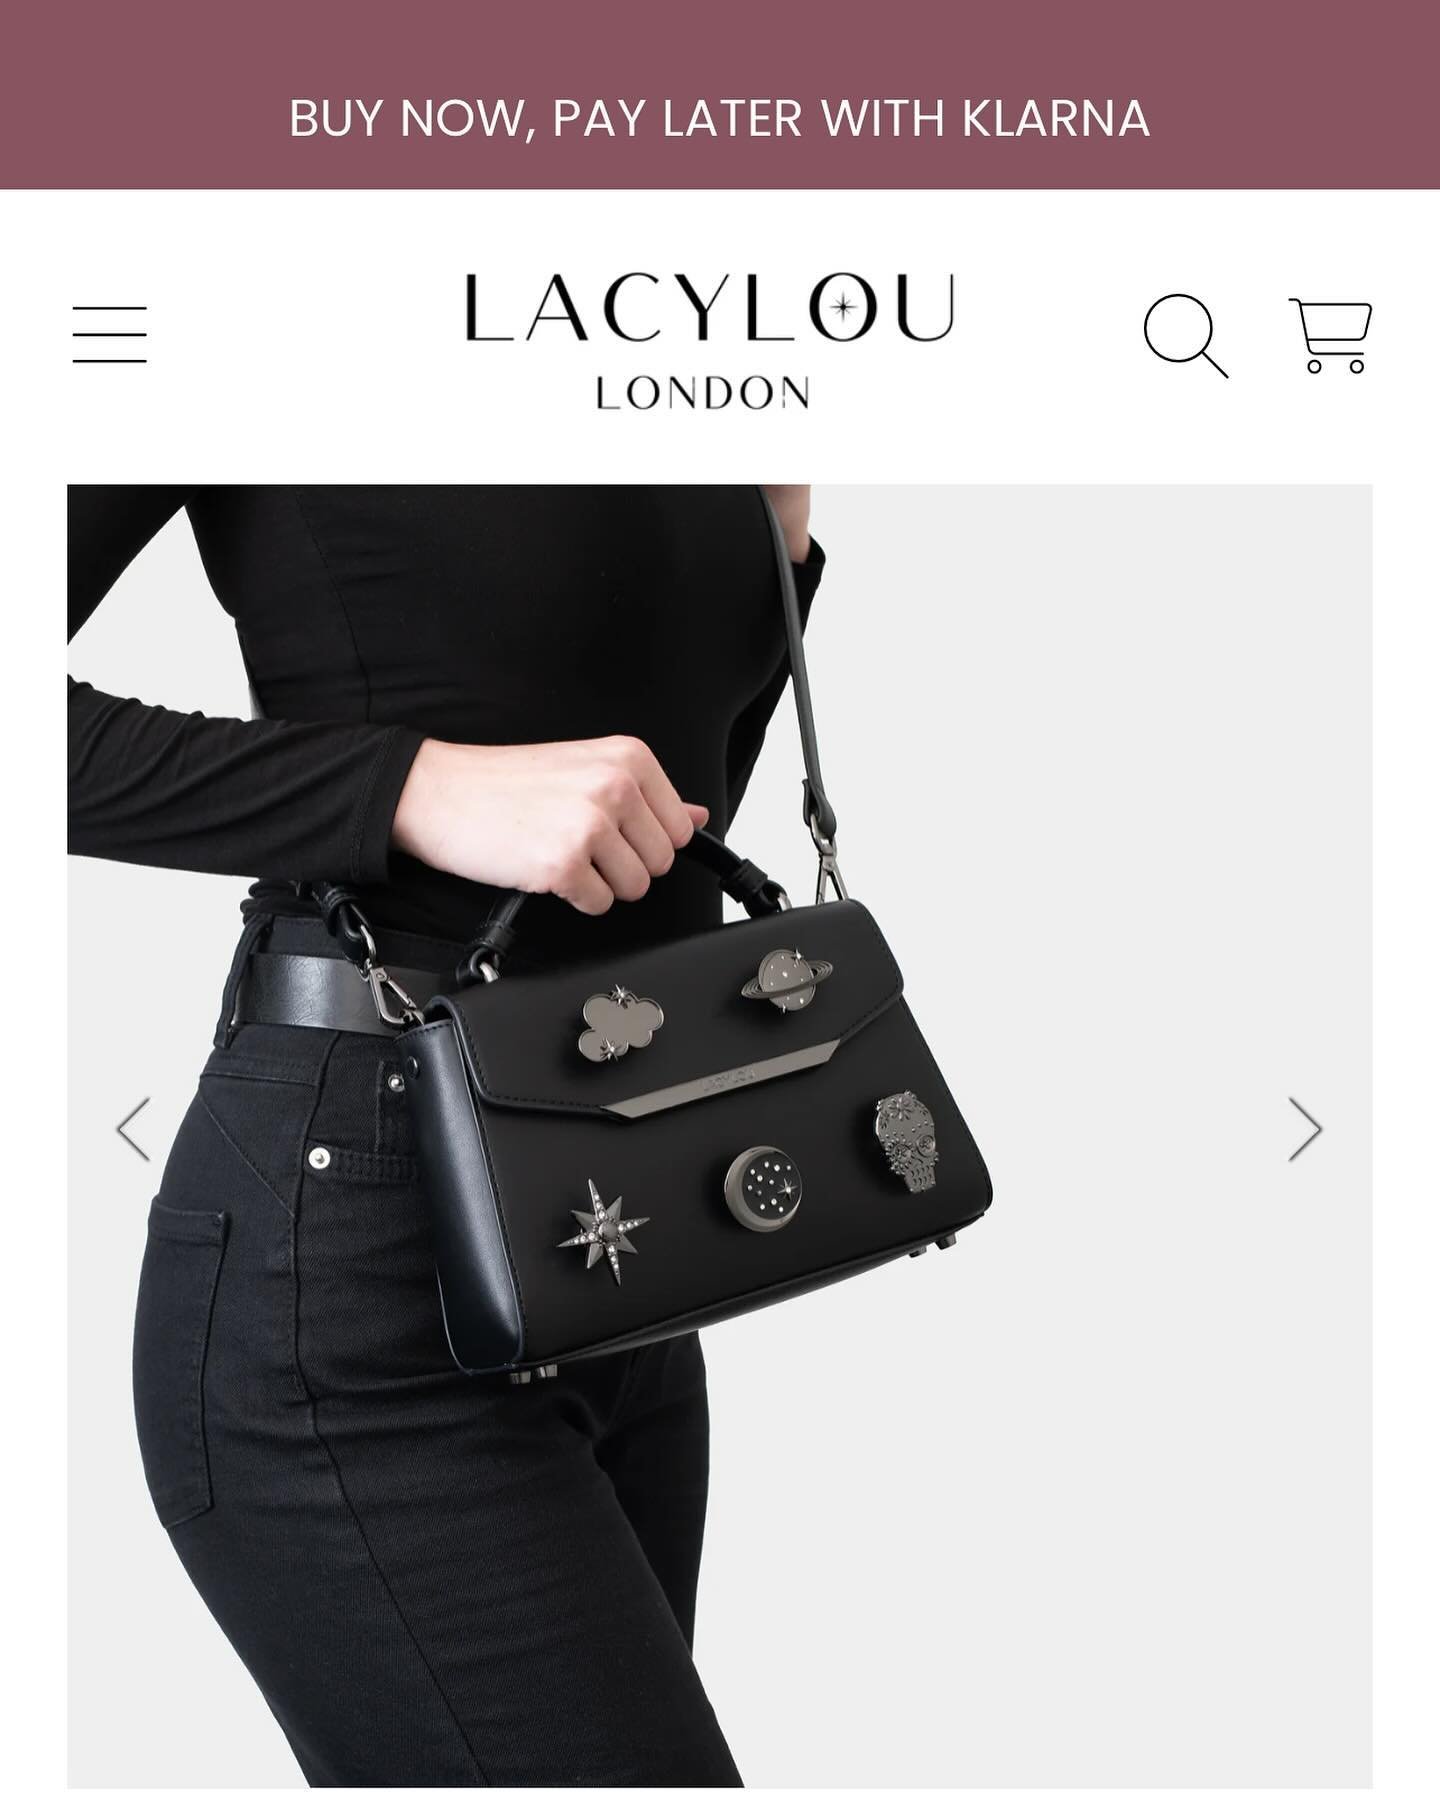 My photography + Your websites = Winning combo 💯 

Get in touch to see how I can help you create professional e&rsquo;commerce imagery that is guaranteed to increase sales ⬆️ 

Examples of some recent product work featured on @lacyloulondon &lsquo;s